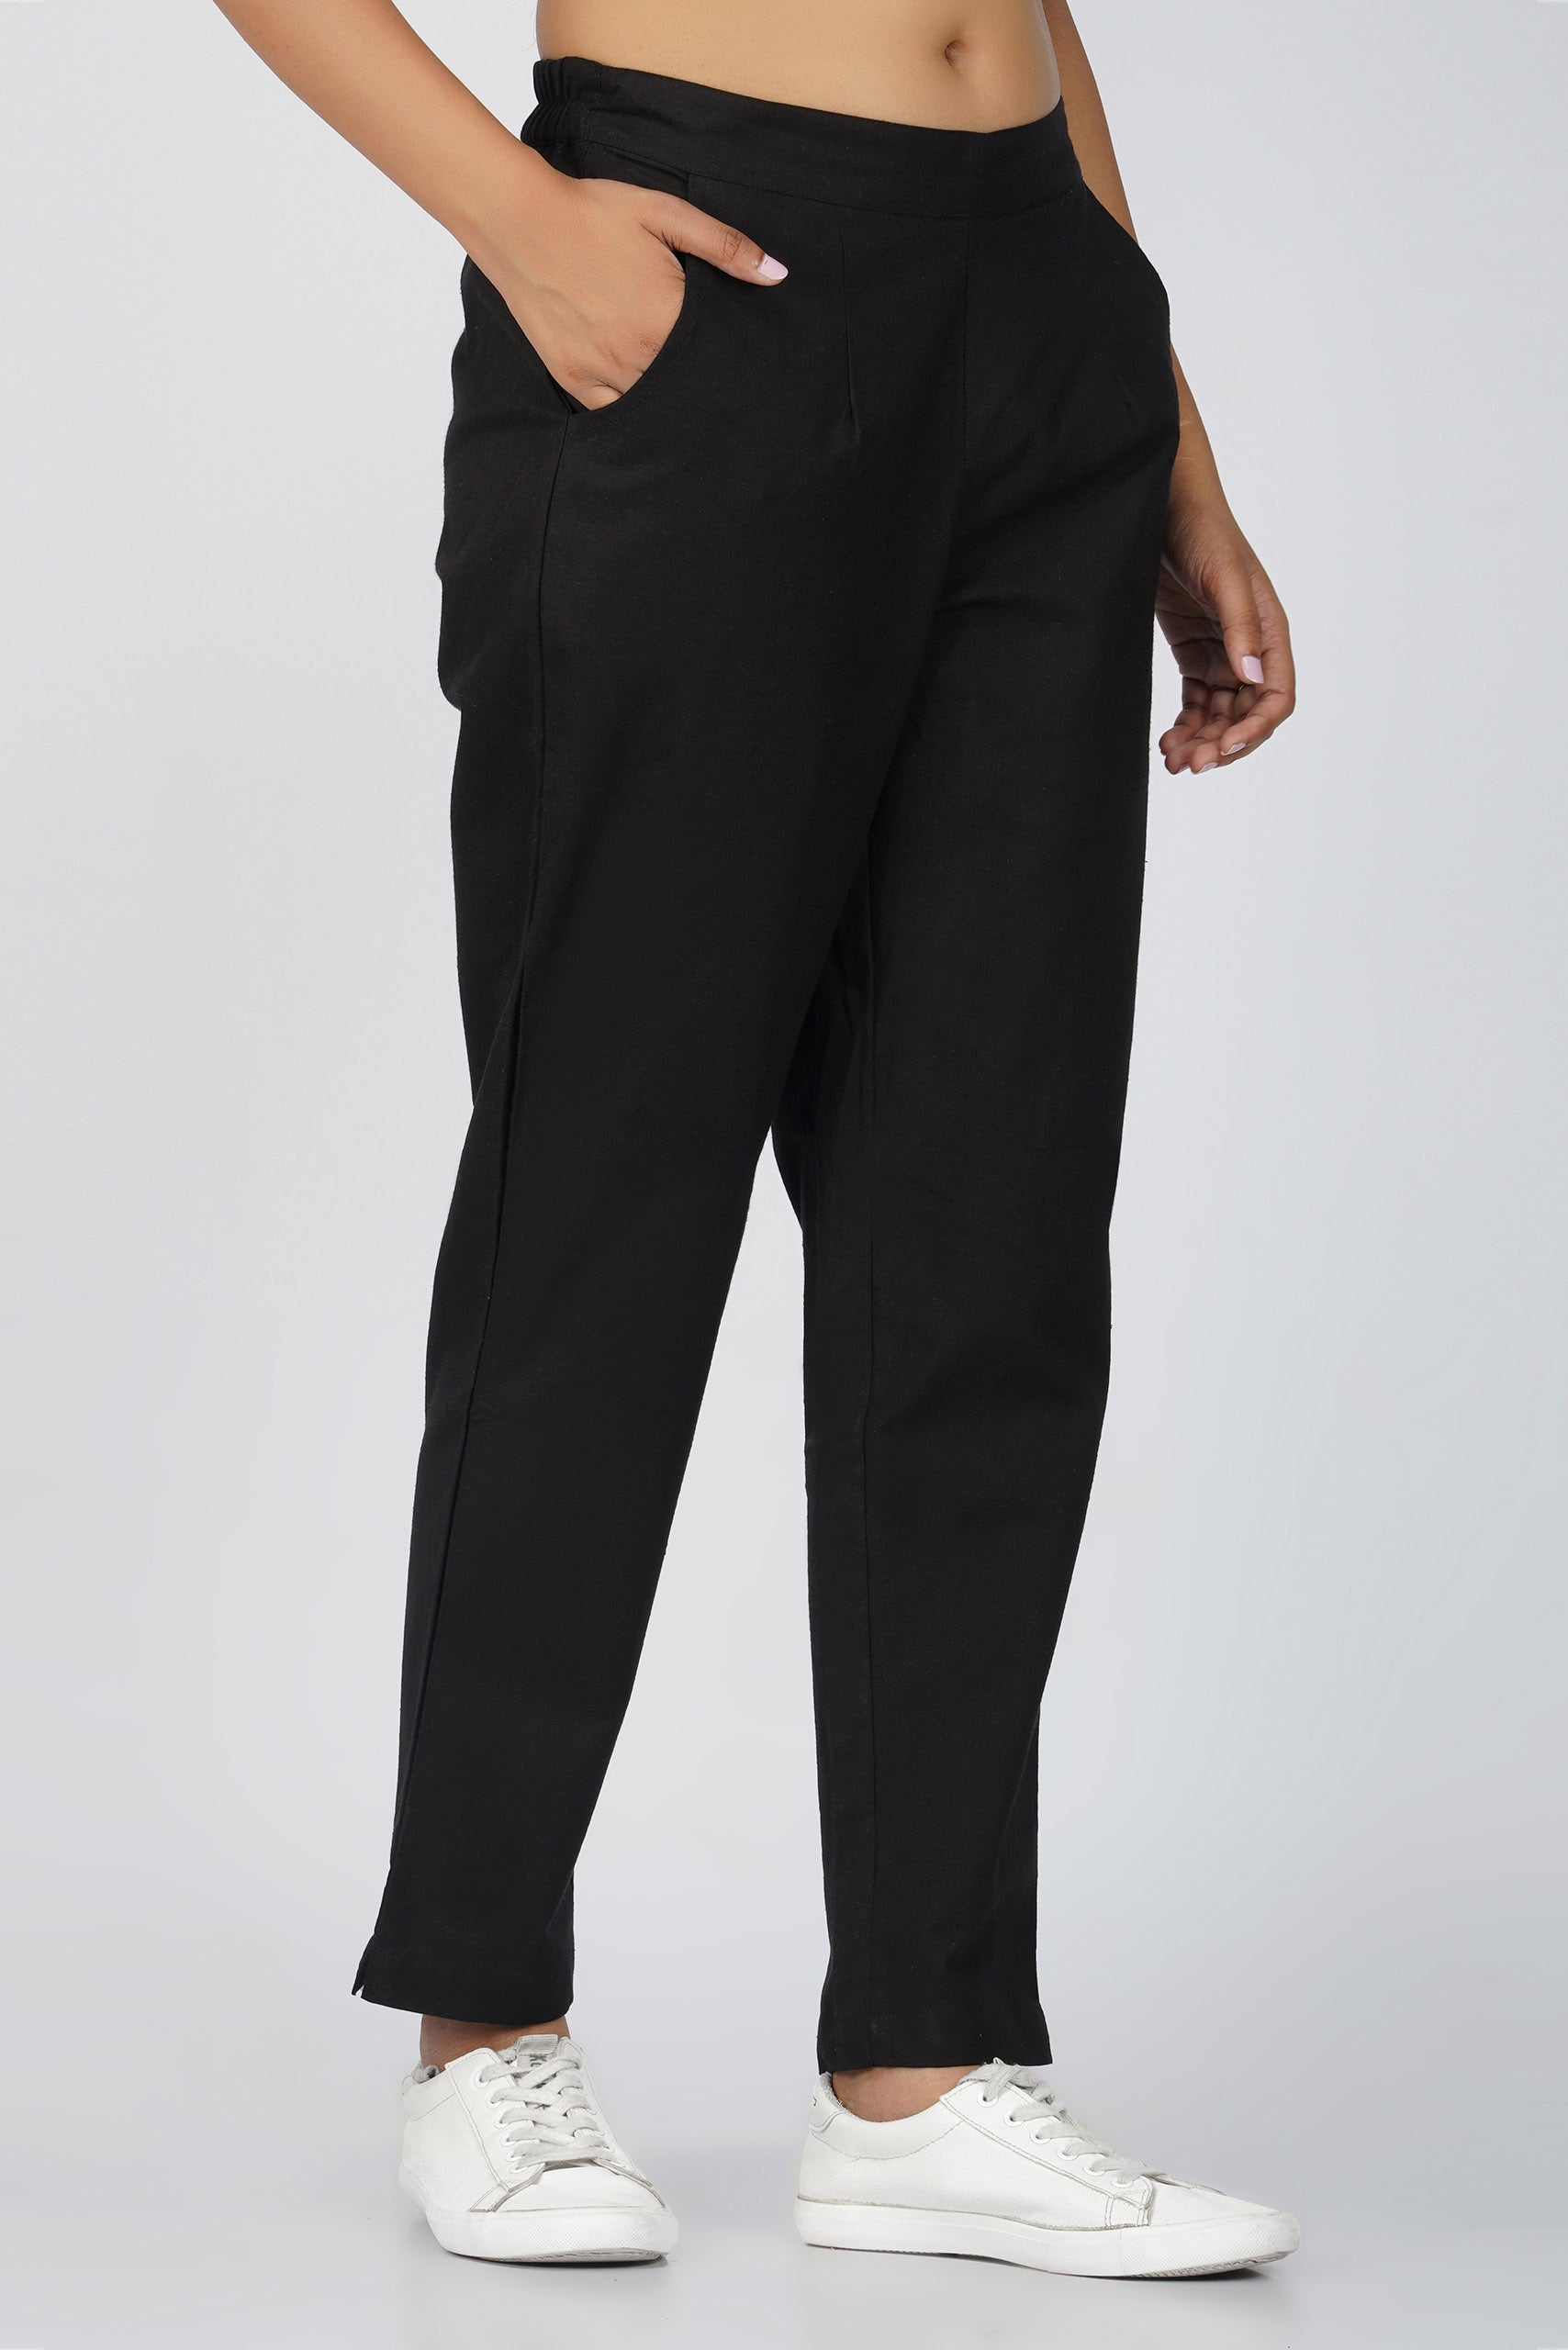 Buy FTX Stylish Black Cotton Solid Regular Trousers For Men Online In India  At Discounted Prices